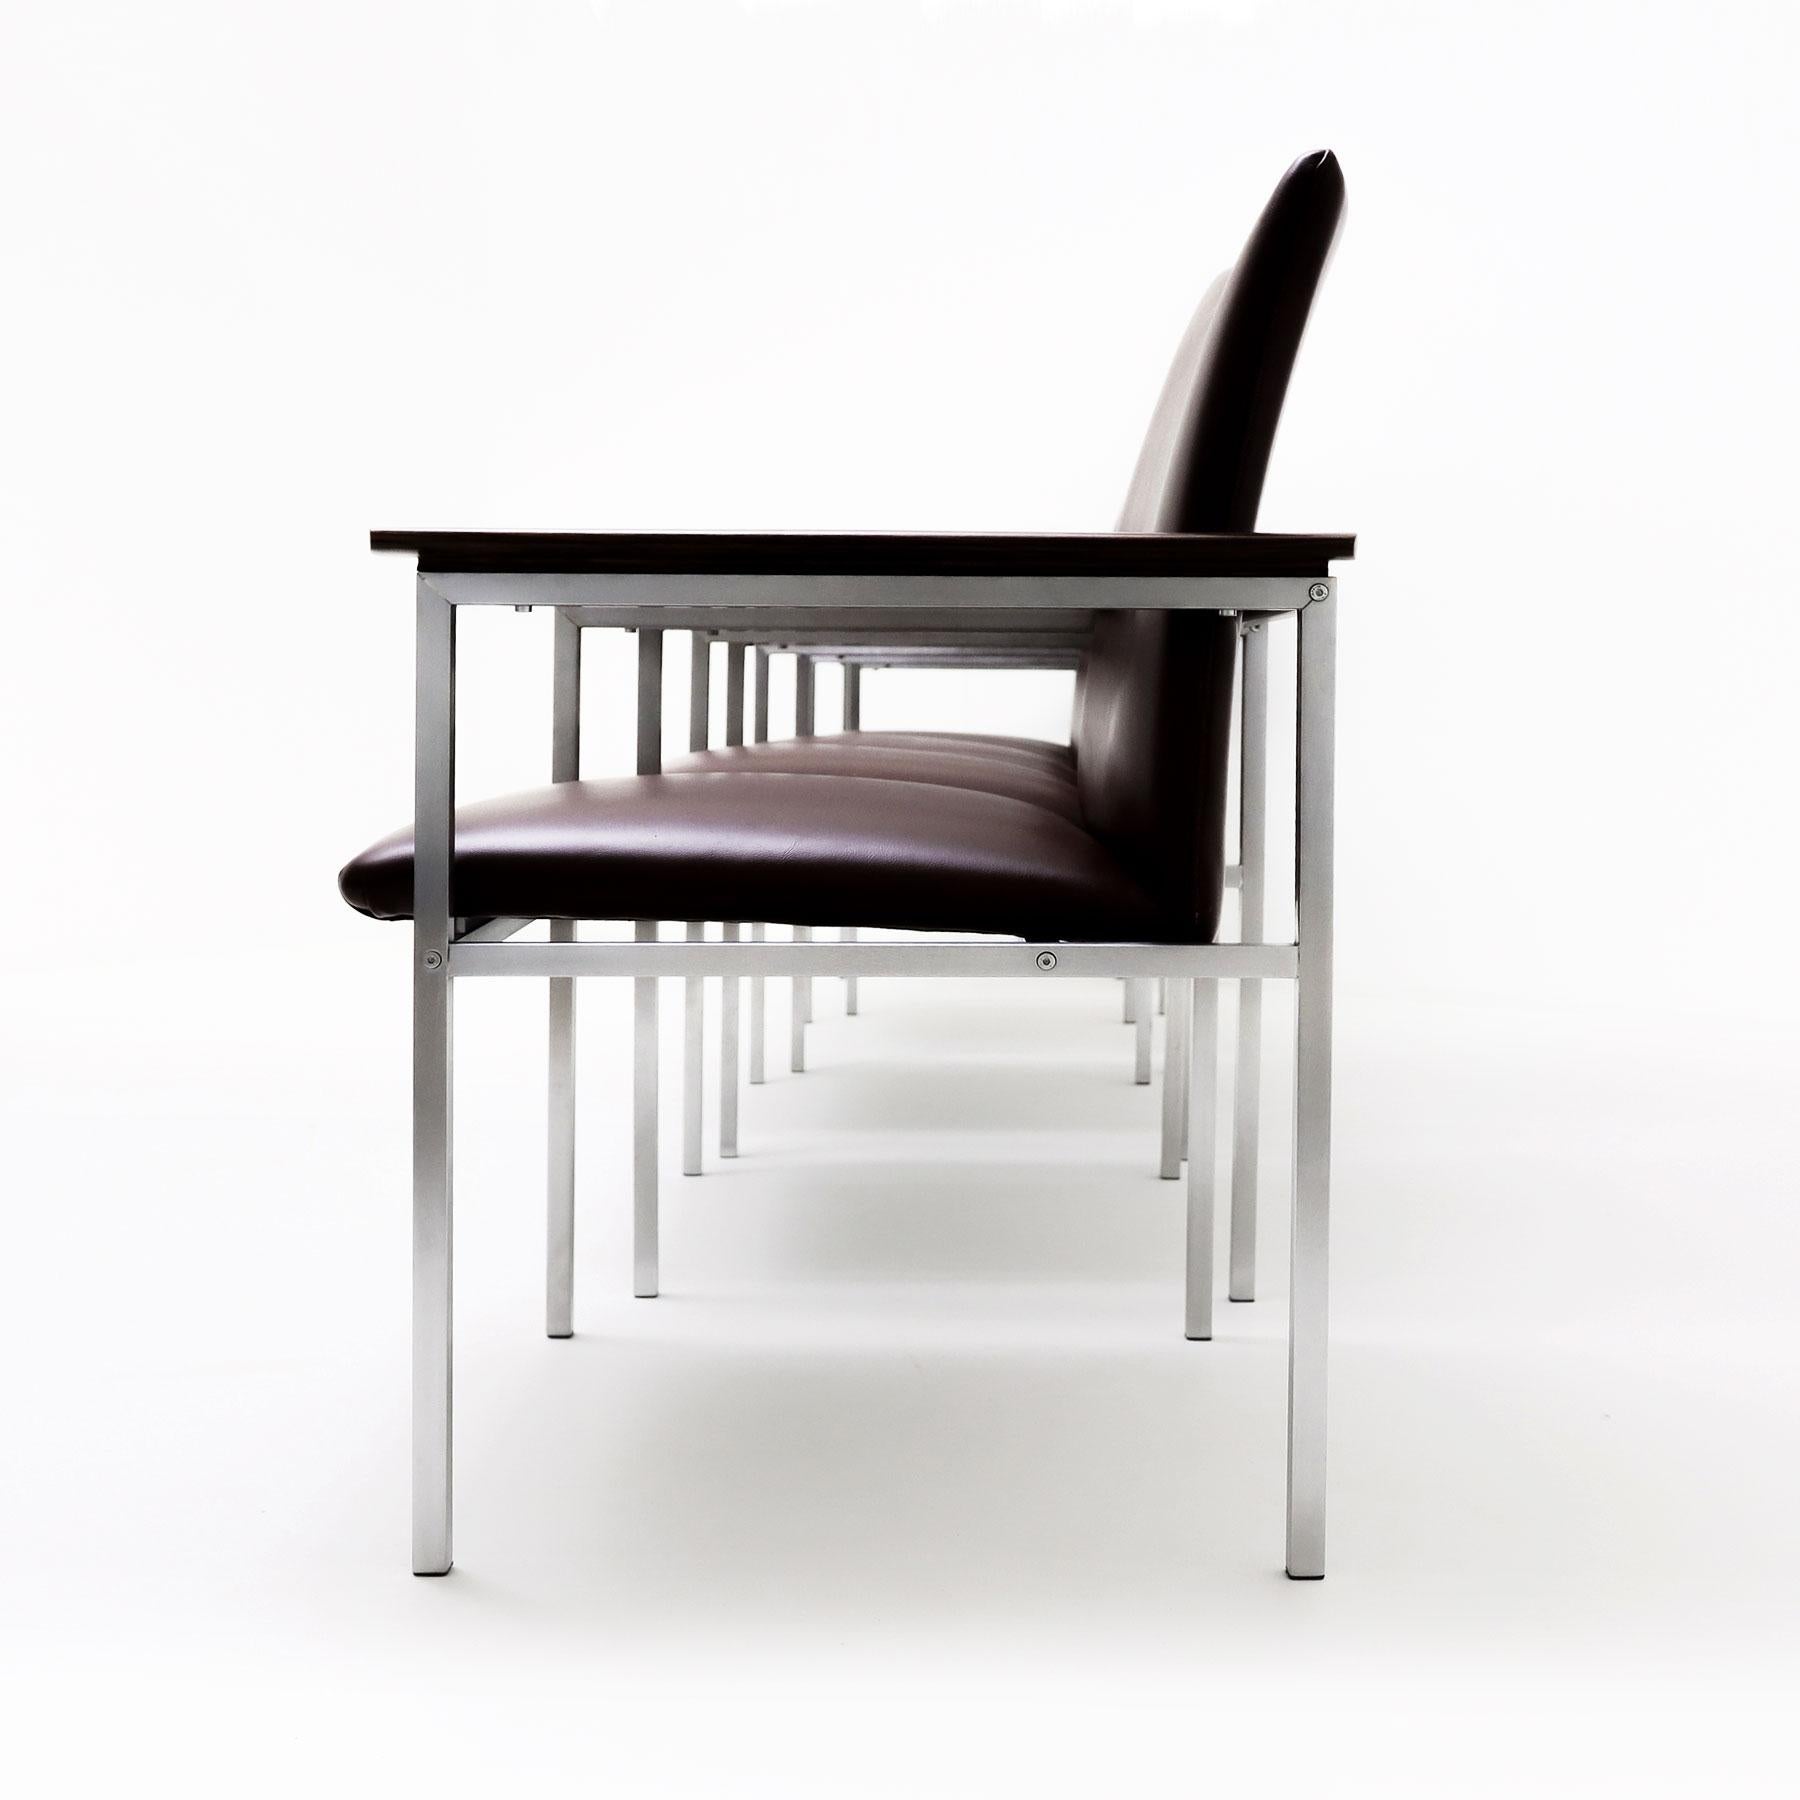 6 Sigvard Bernadotte H-line chairs in brushed steel, Walnut and leather For Sale 4